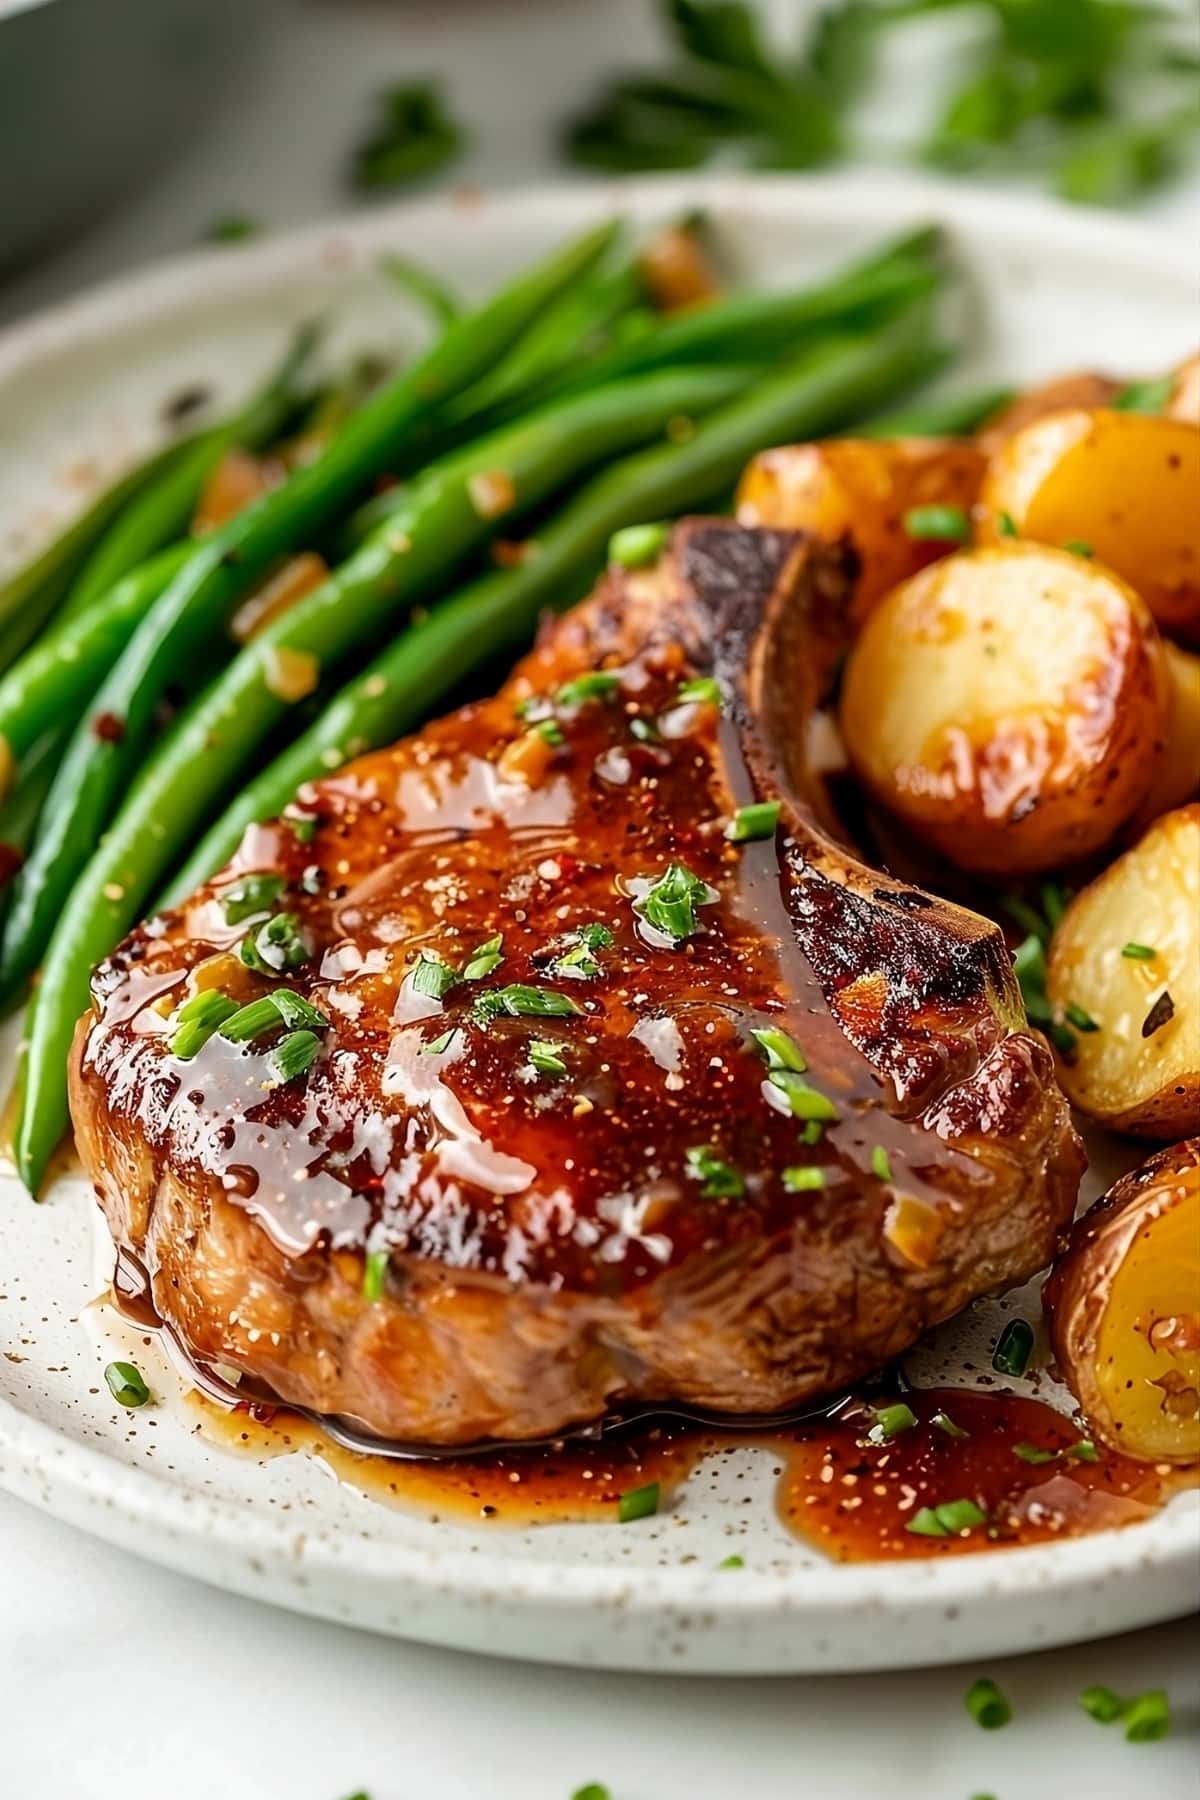 Pork chops with brown sugar sauce in a plate served with potatoes and green beans.